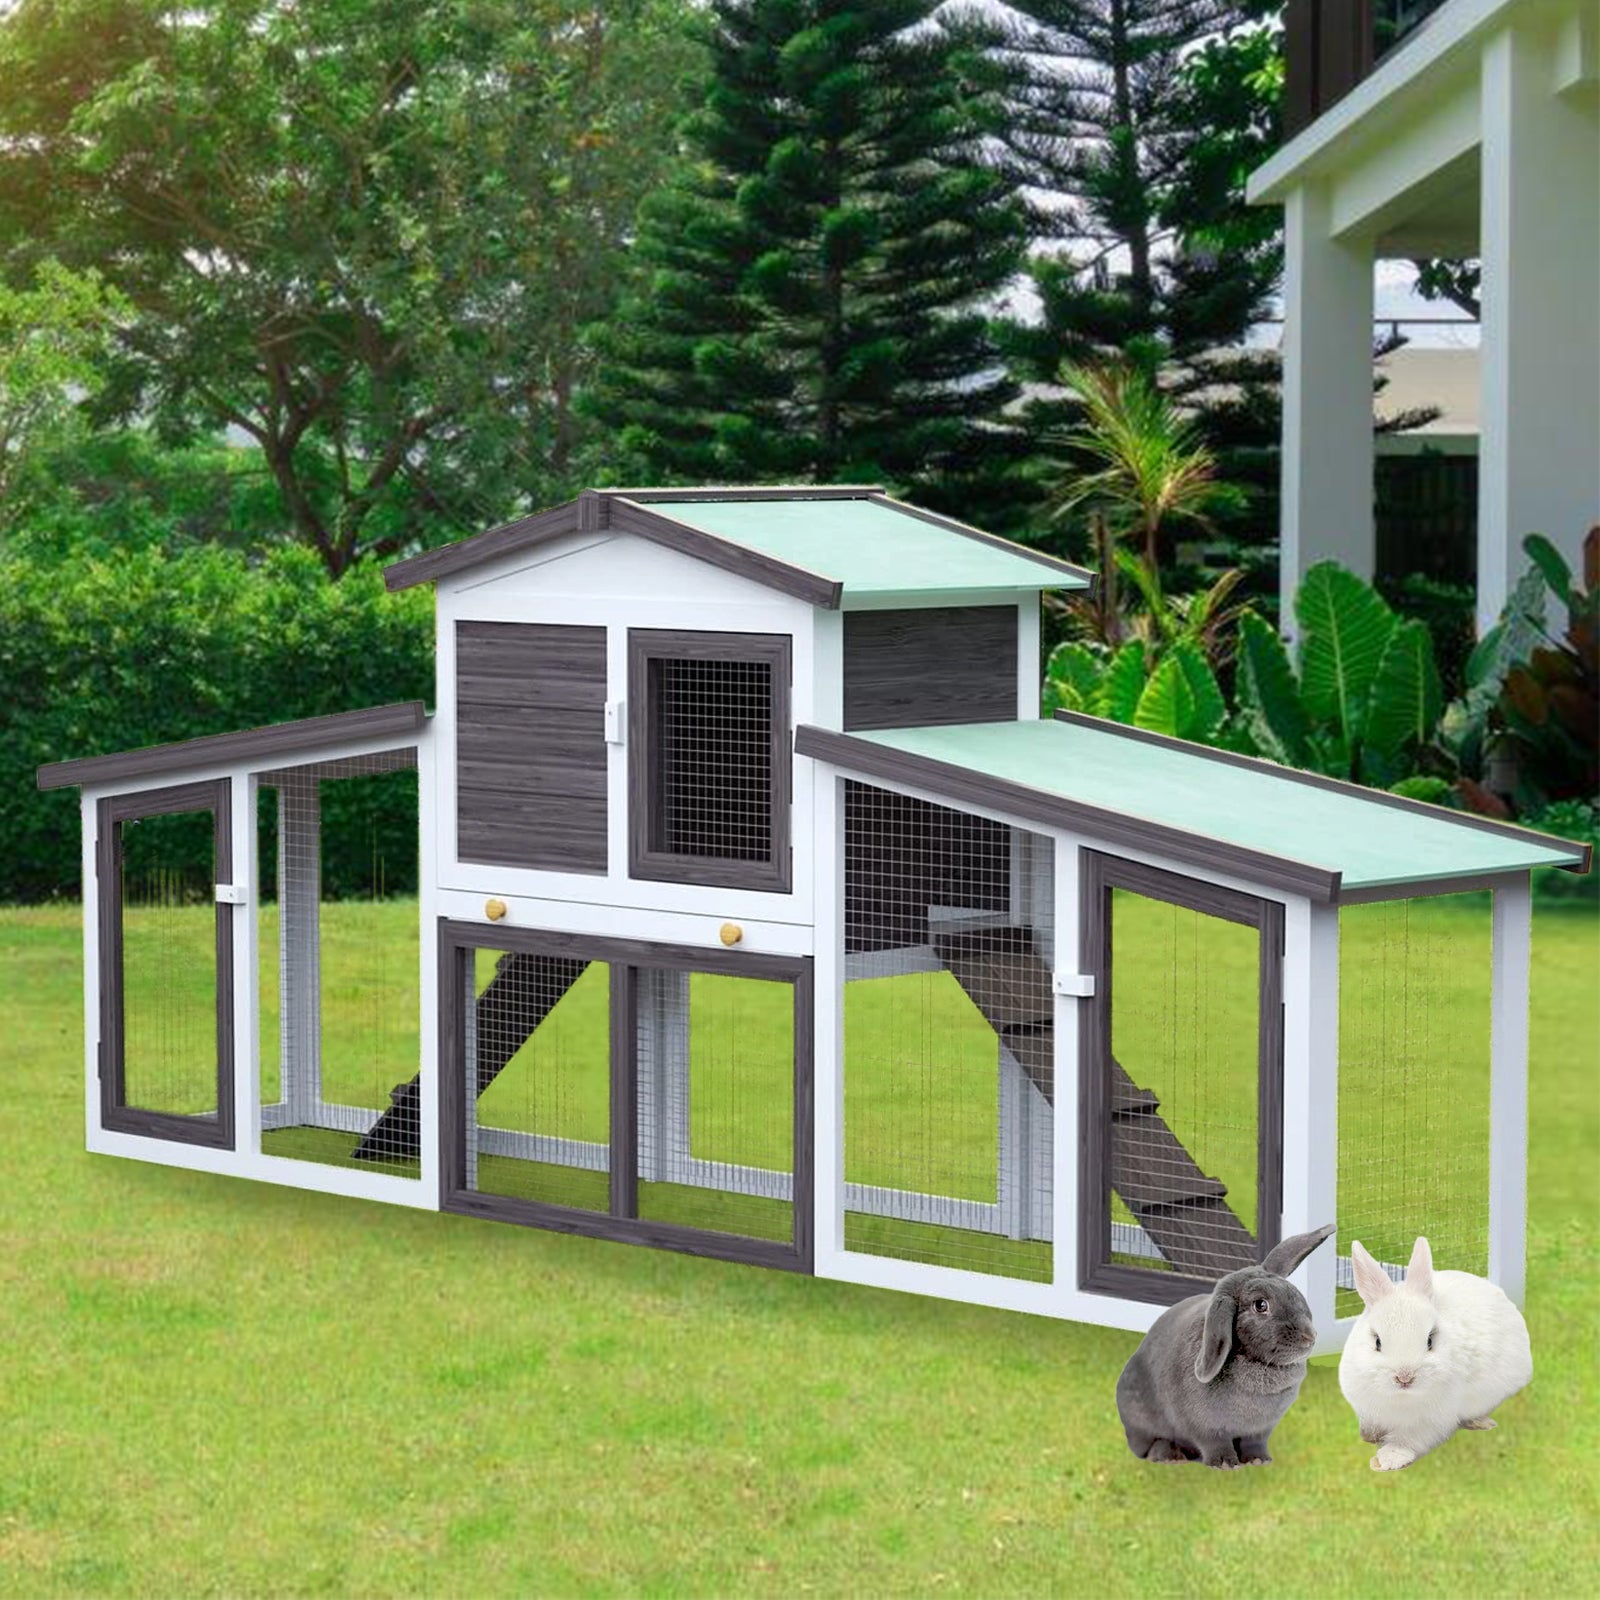 Advwin Rabbit Hutch Chicken Coop Wooden Pet Cage Bunny Cage